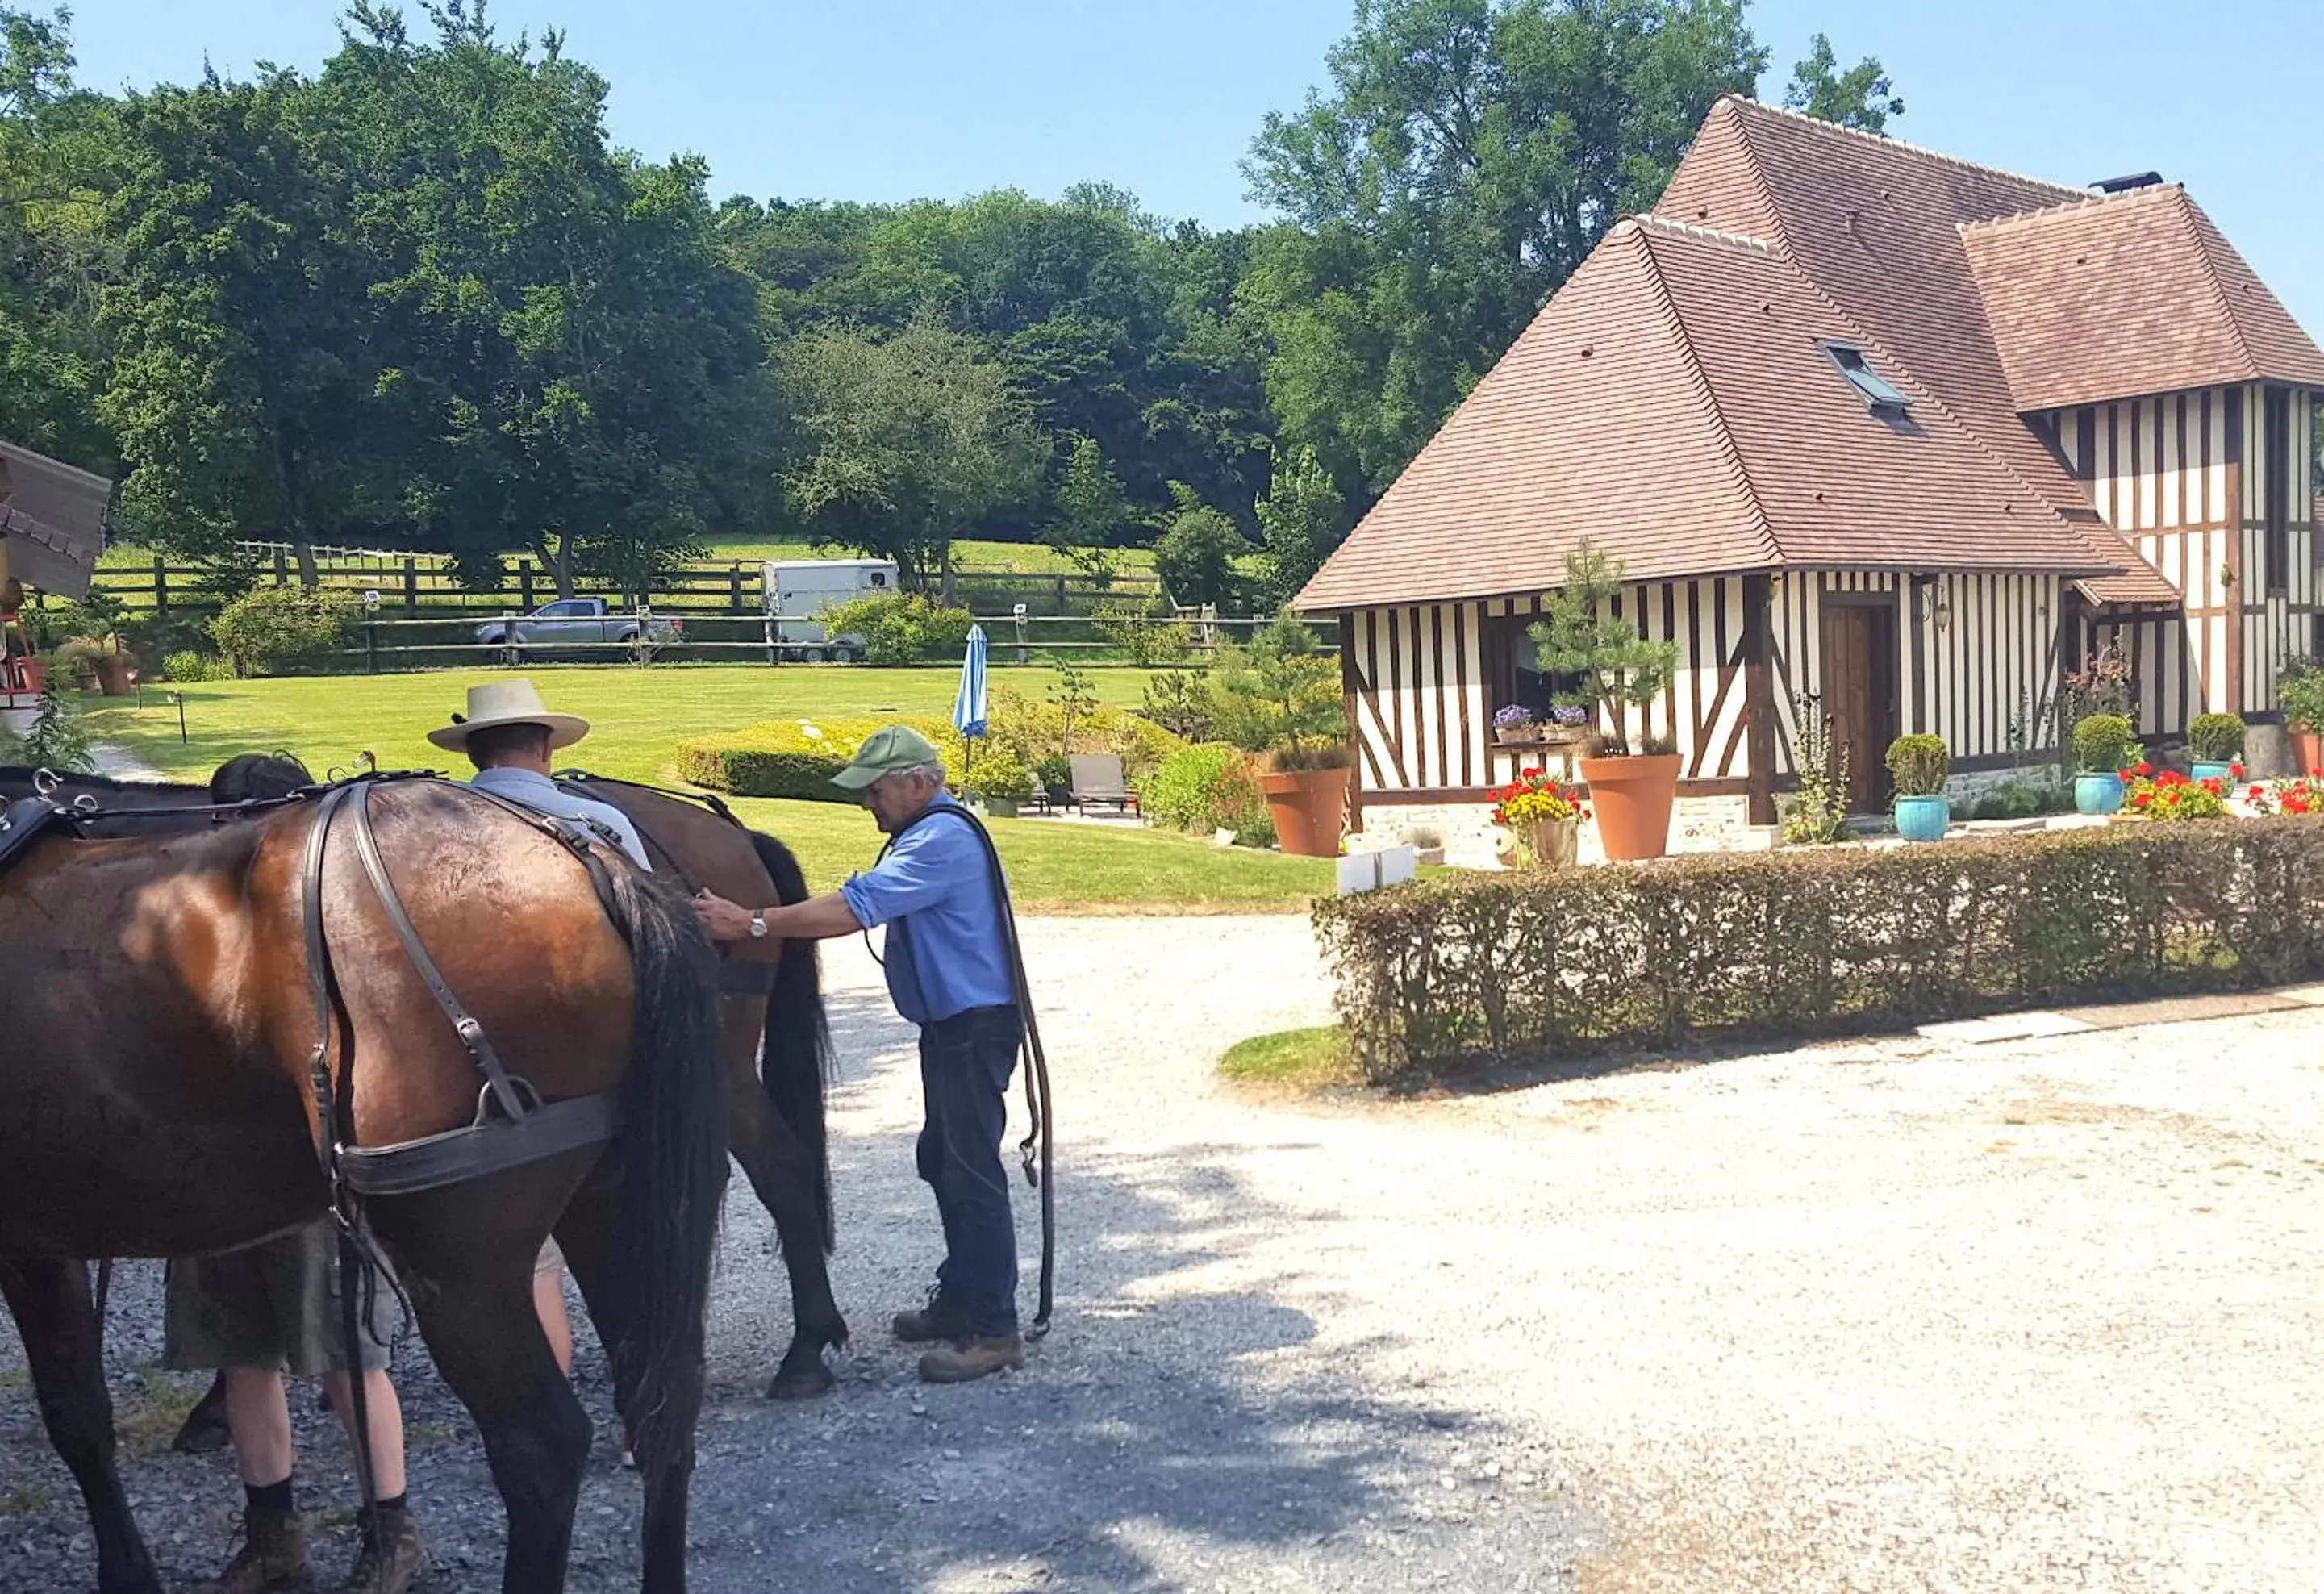 Property building, Horseback Riding in L'Herbe aux Vaches